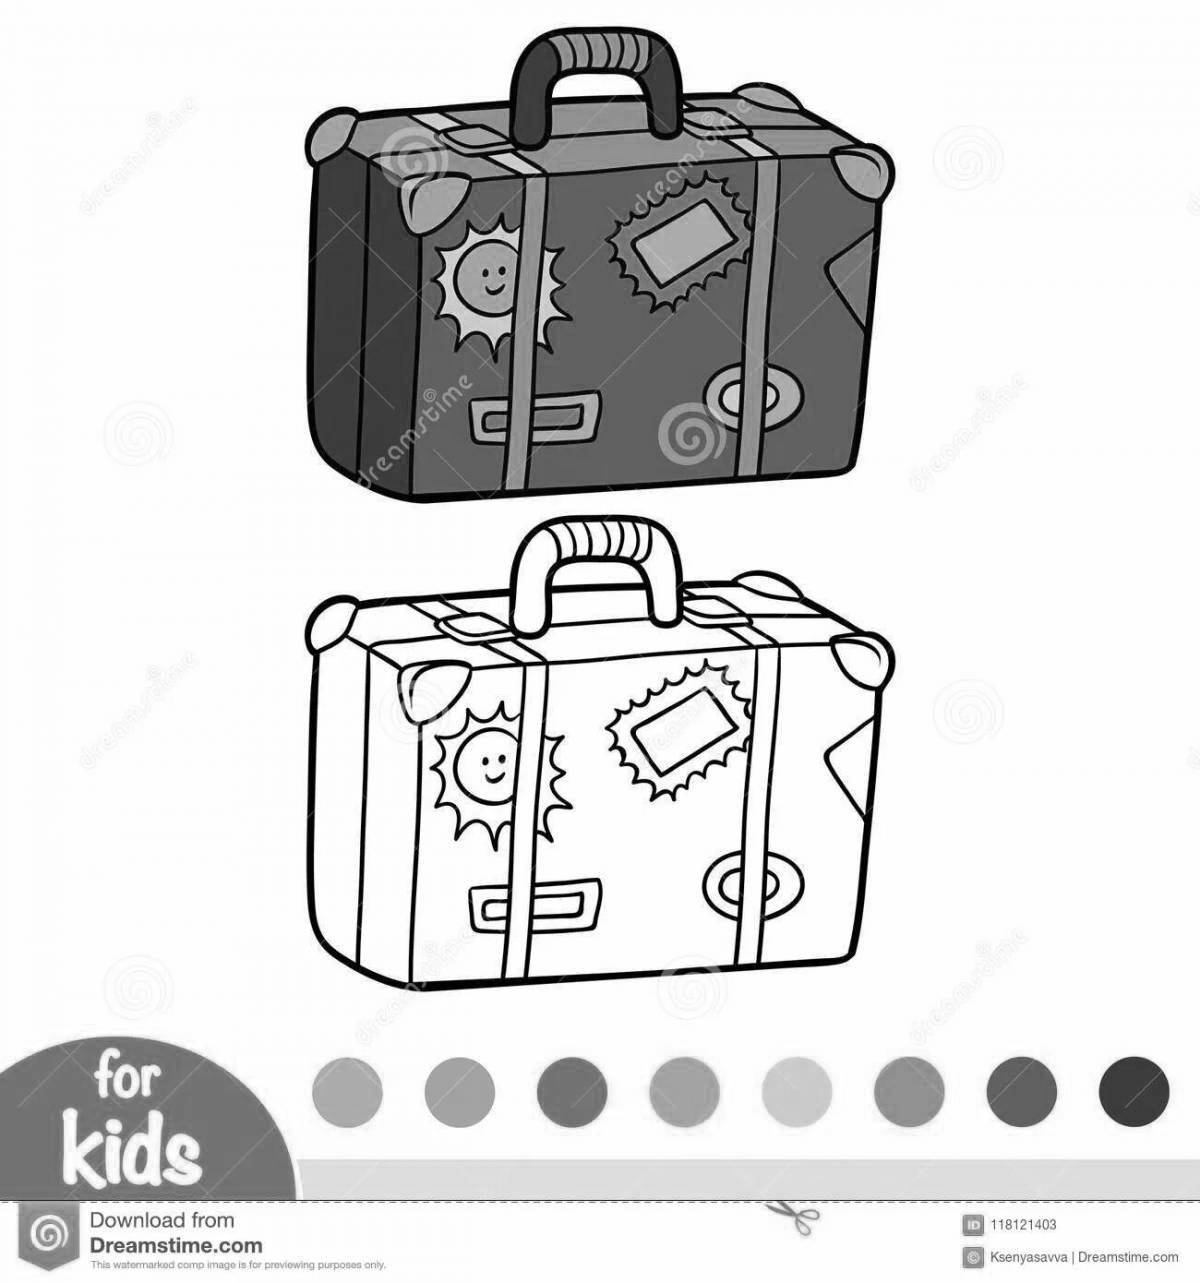 Coloring suitcase for the little ones